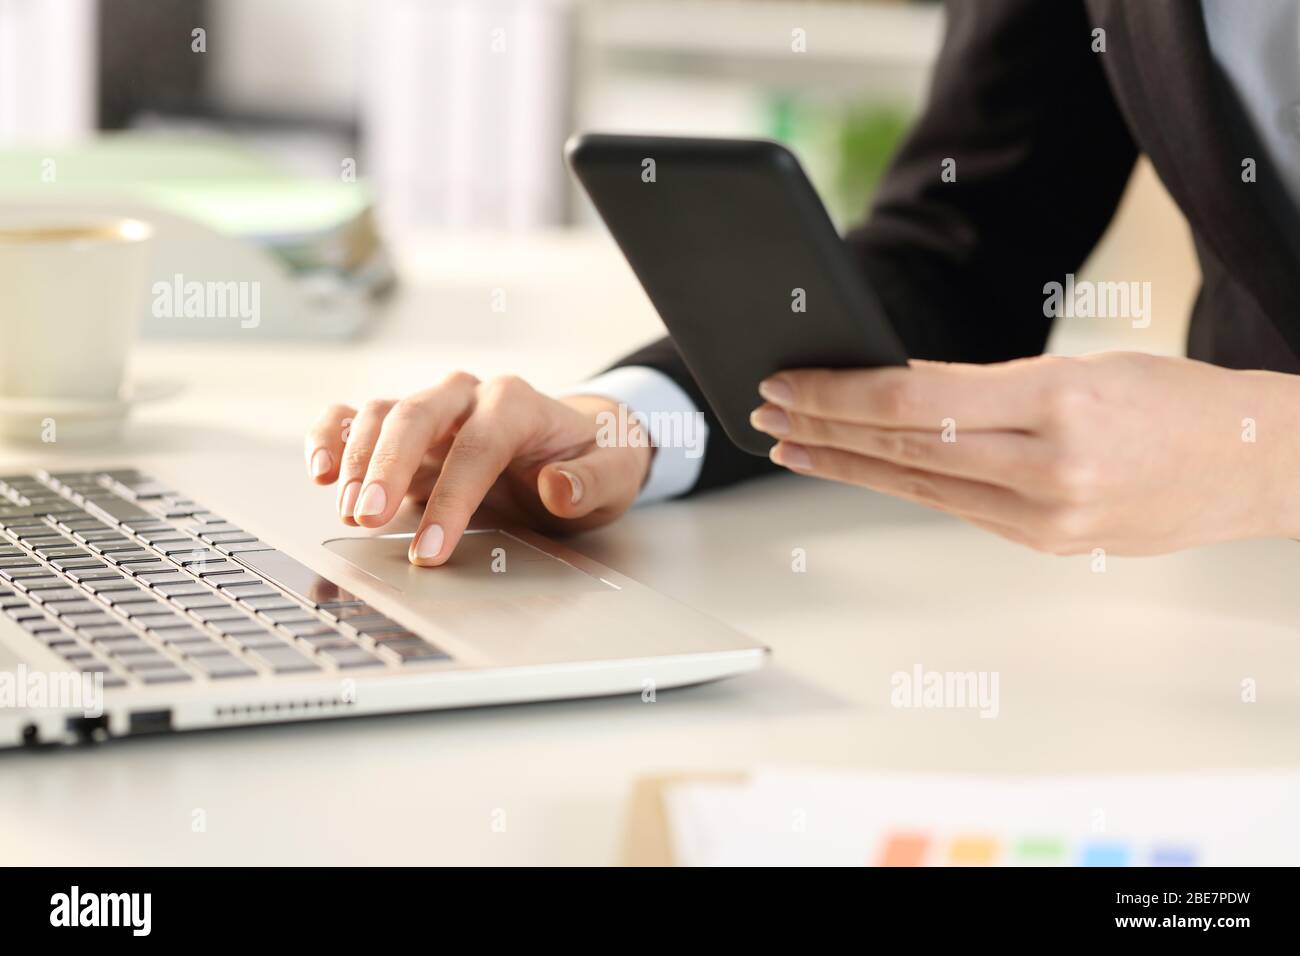 Close up of executive woman hands using mobile phone and laptop on a desk at office Stock Photo